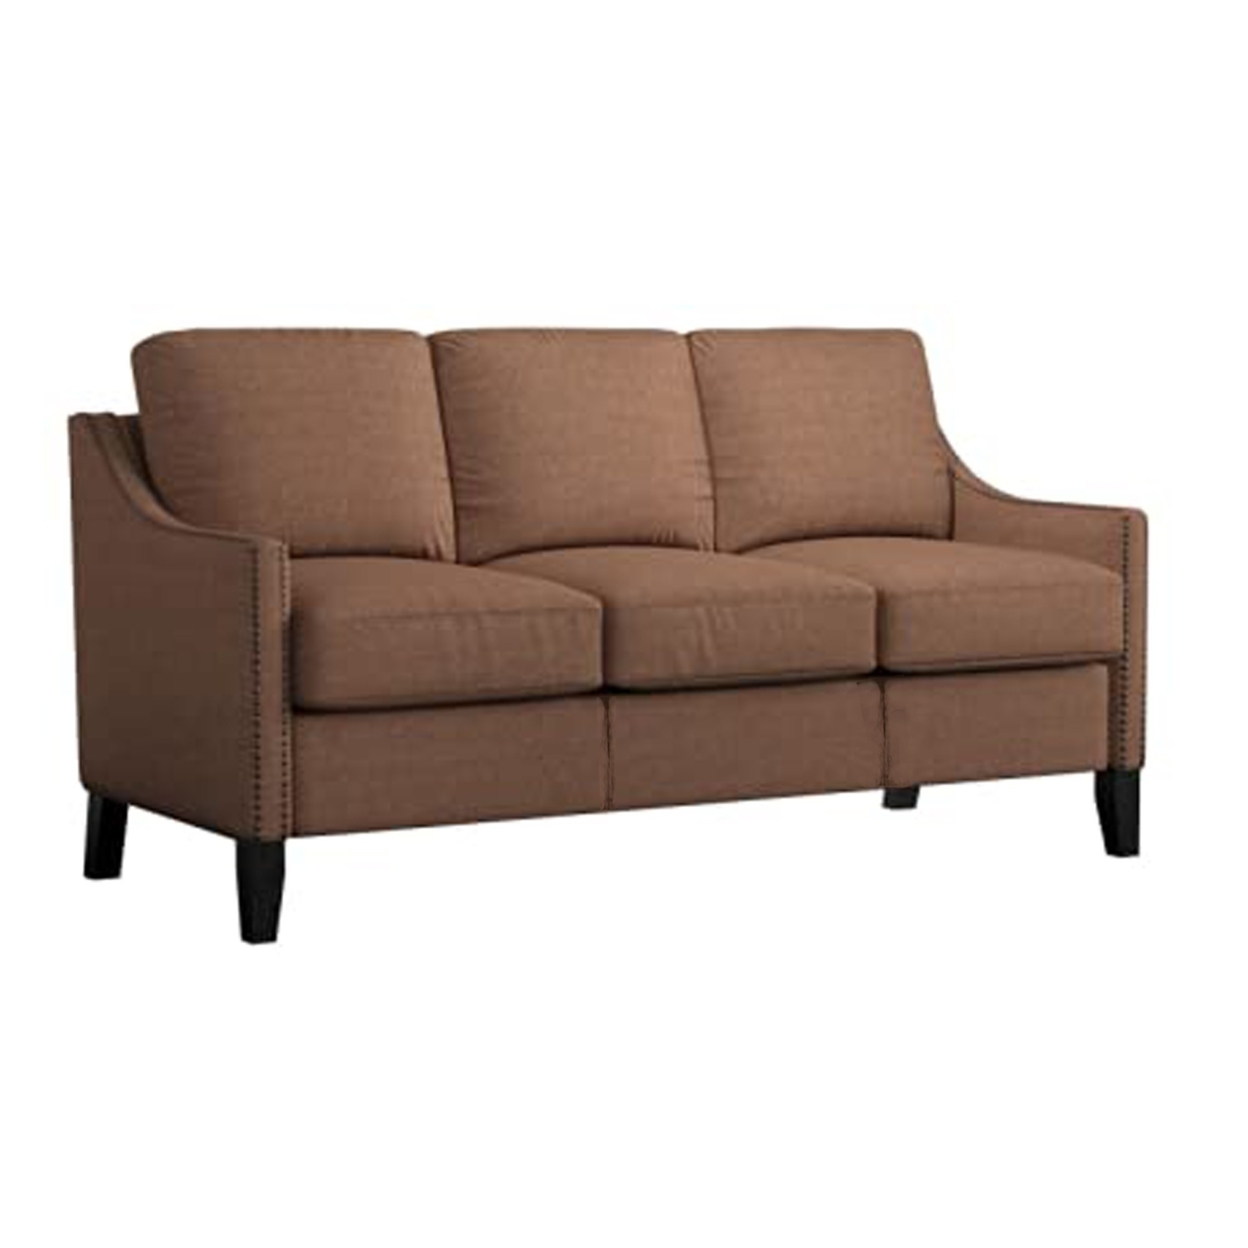 Linen Fabric Upholstered Wooden Three Seater Sofa With Nail Head Details, Brown- ACME